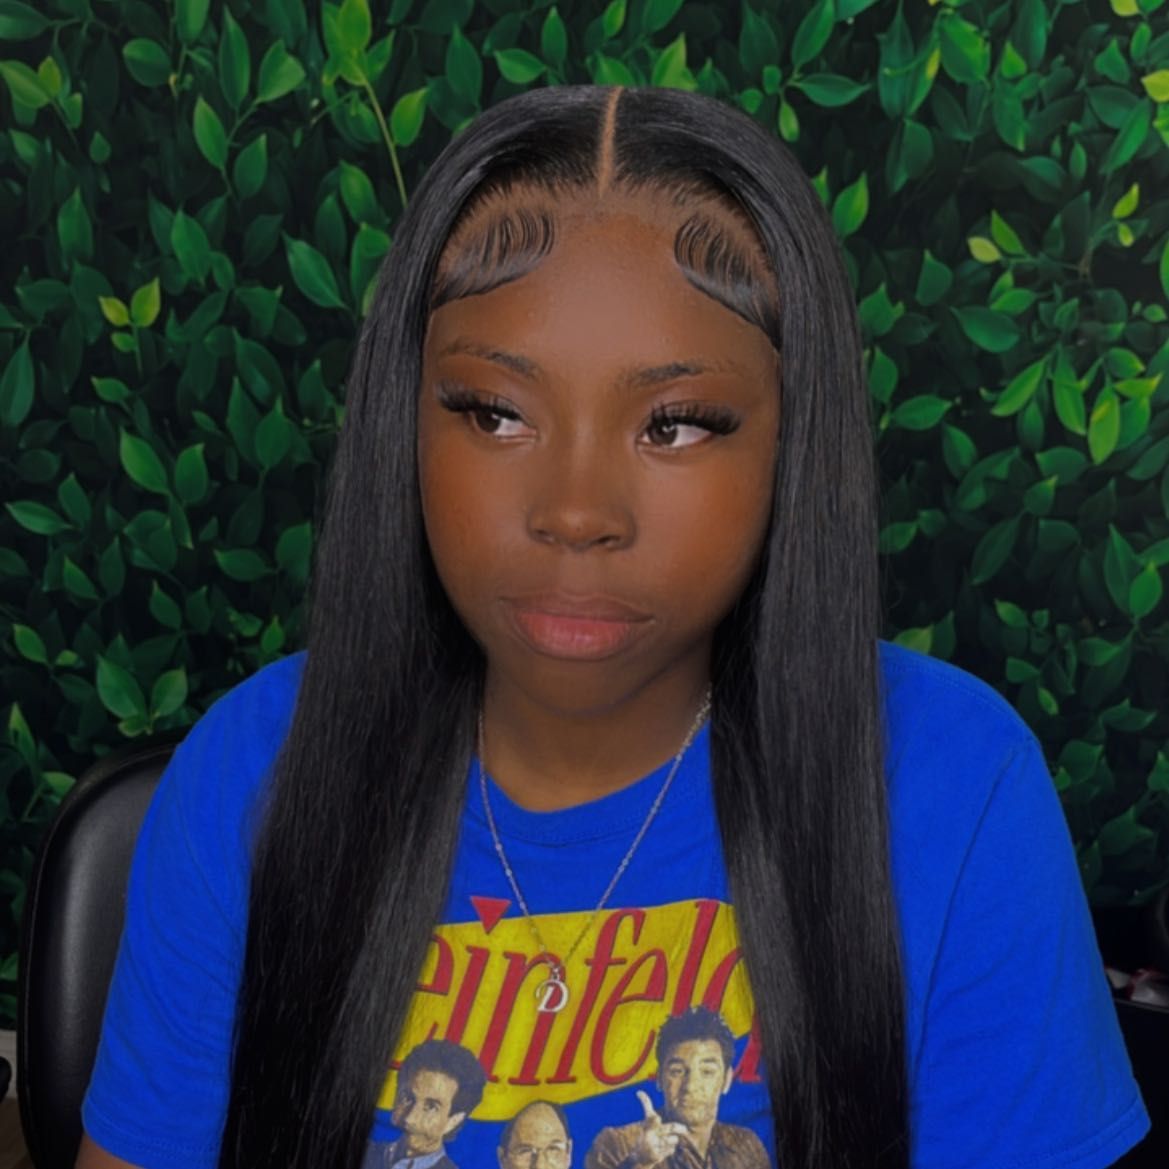 Touch up Lace Wig portfolio